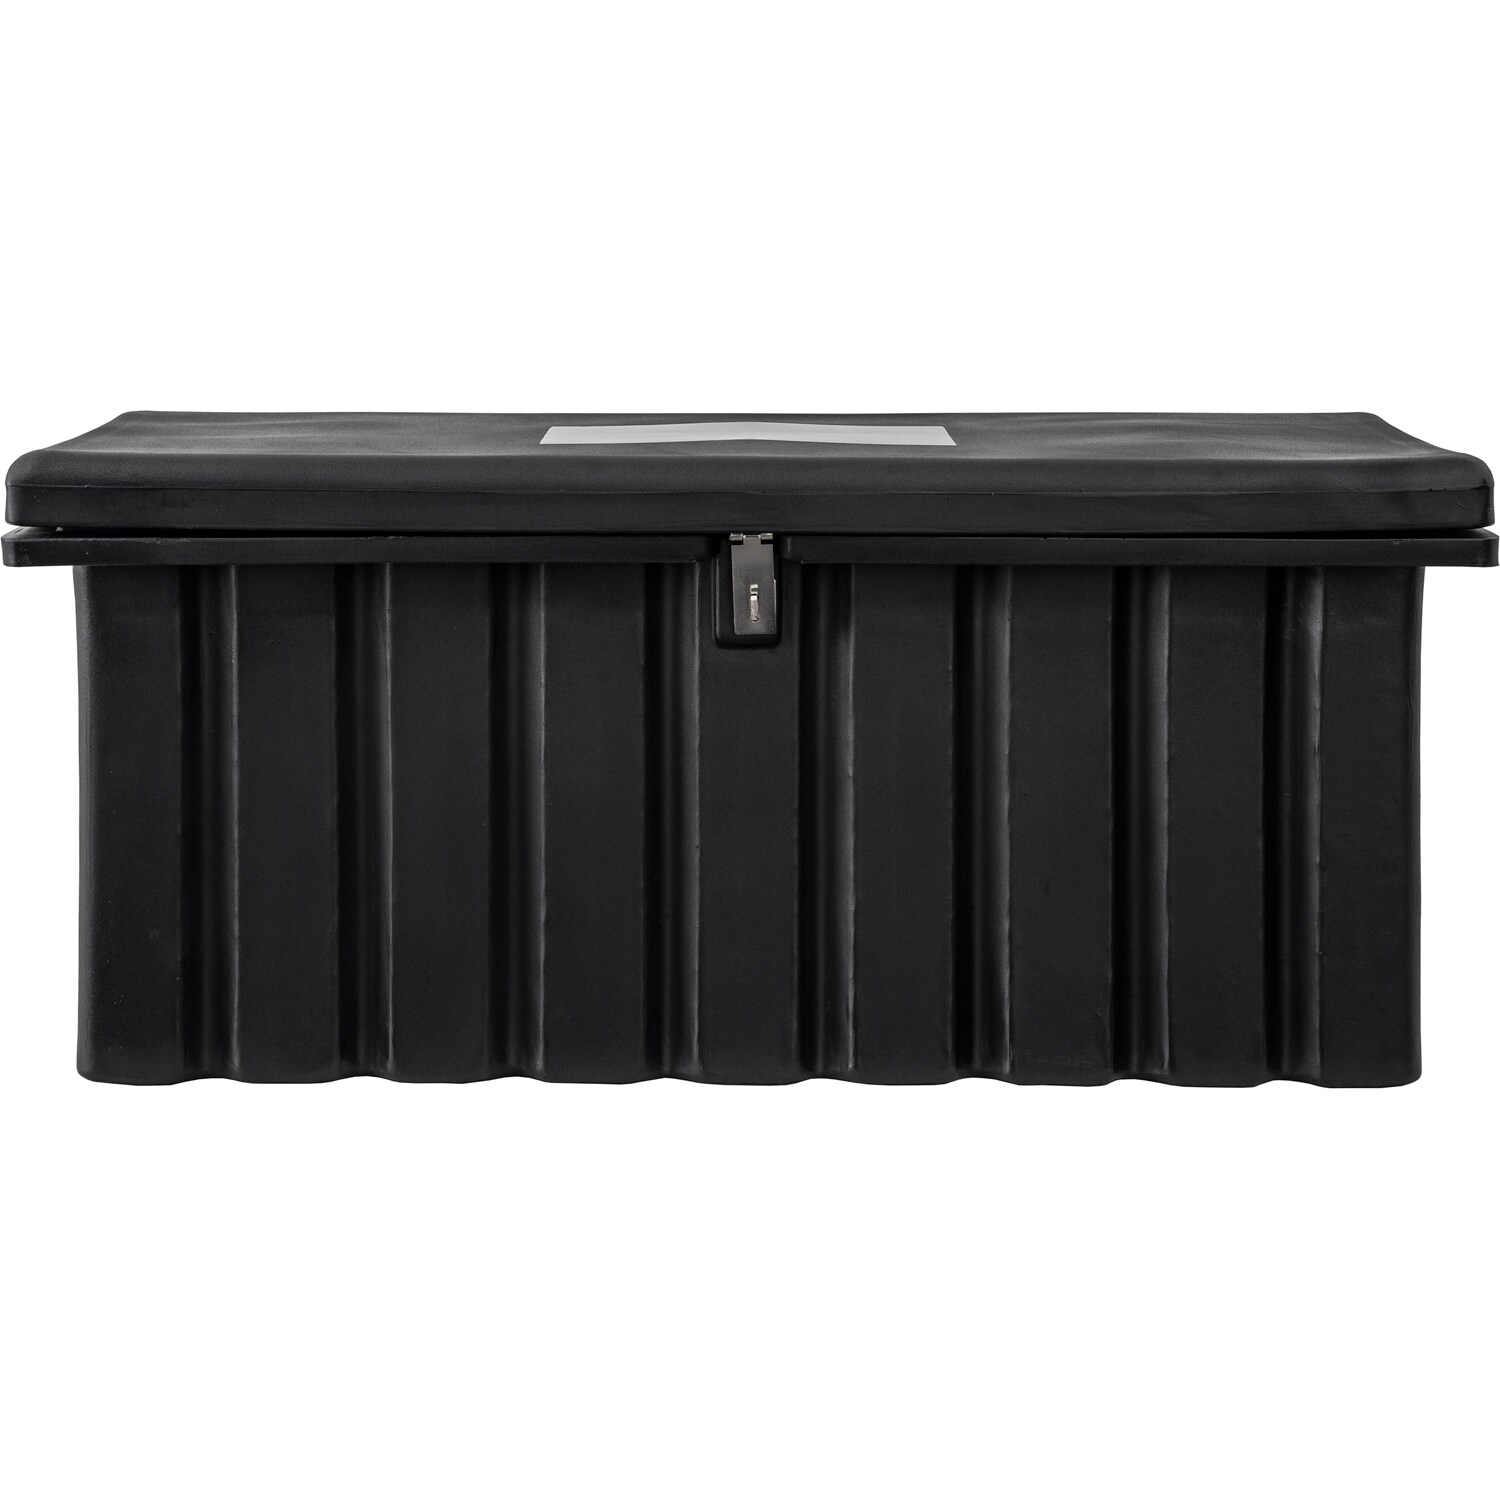 Keter 16 Pro Black Durable Lightweight Toolbox Organizer with Double